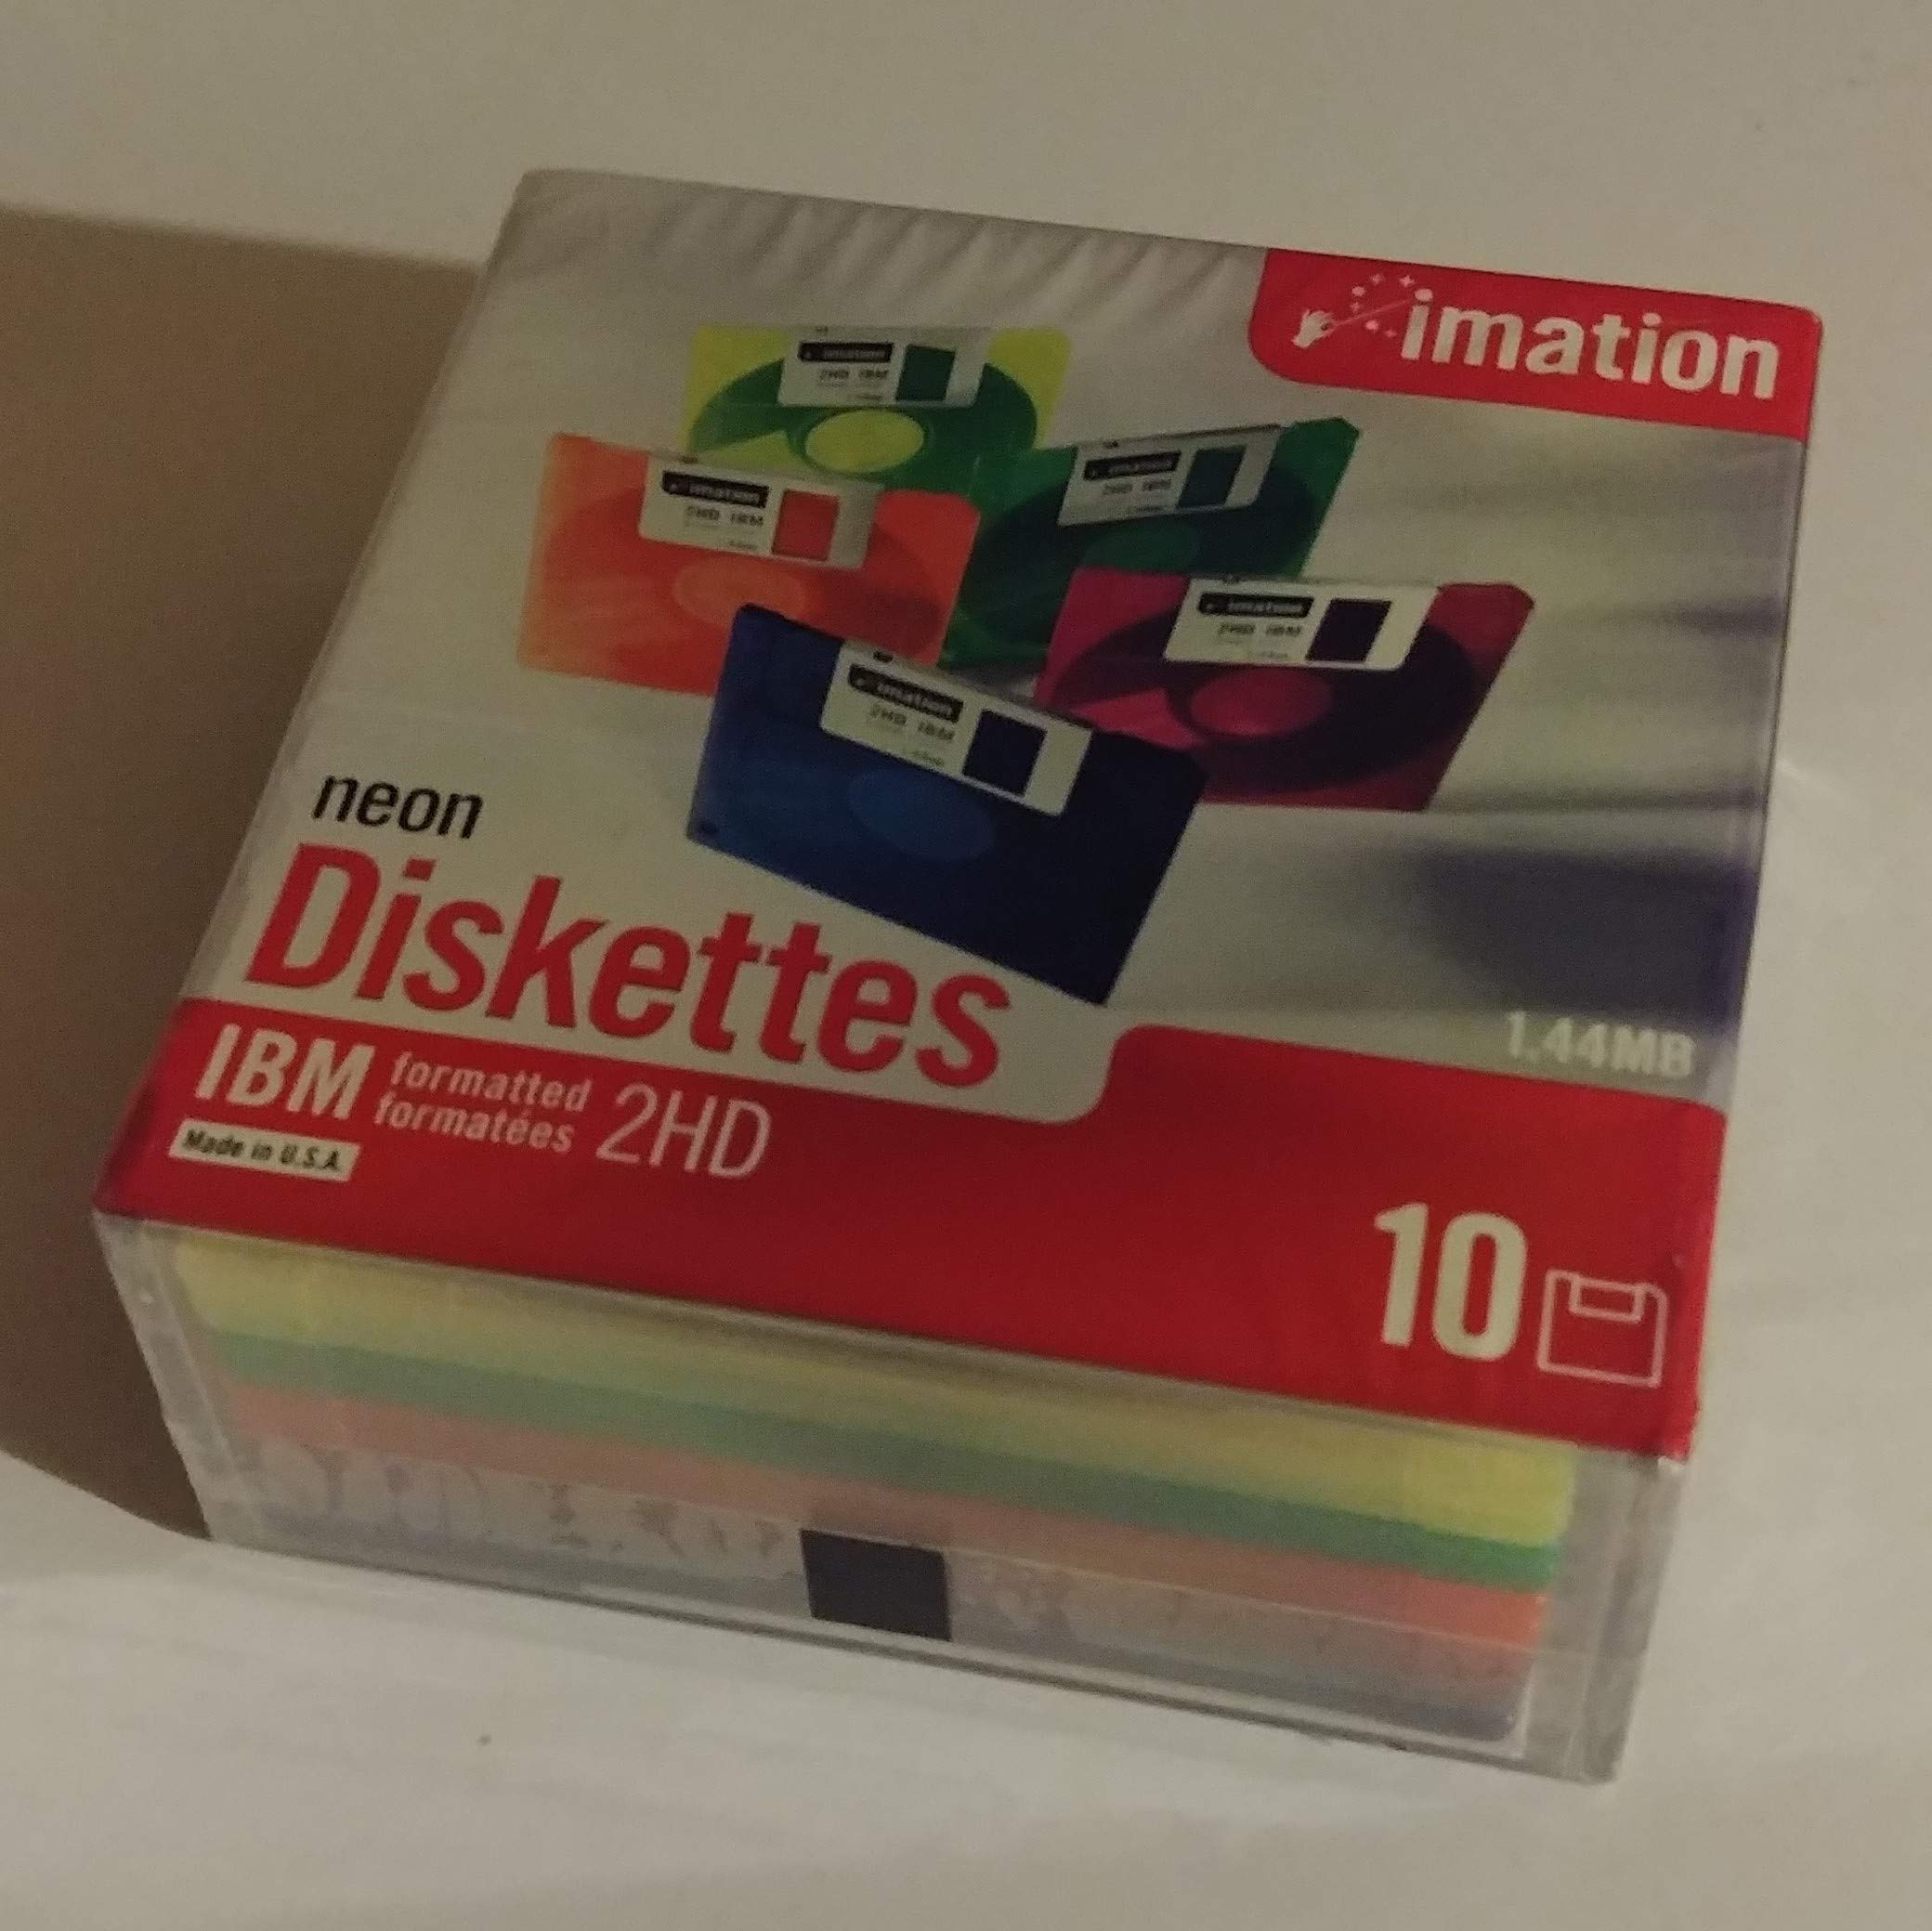 Imation Neon Floppy Diskettes IBM Formatted 1.44MB 2HD (10)